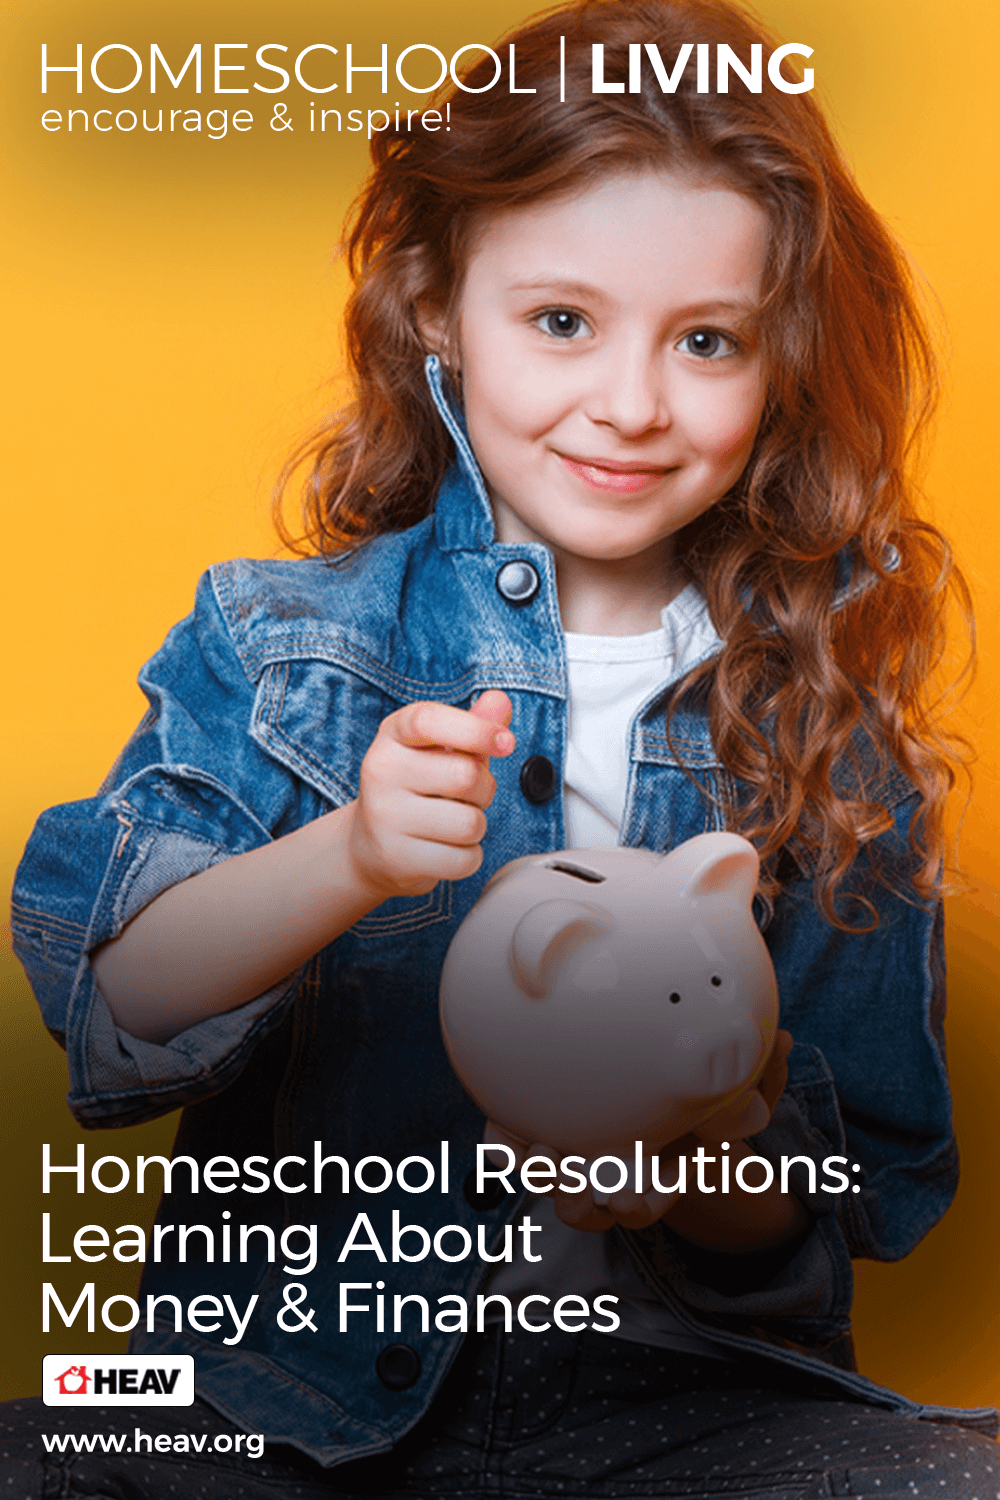 Homeschool Resolutions: Learning About Money & Finances 1